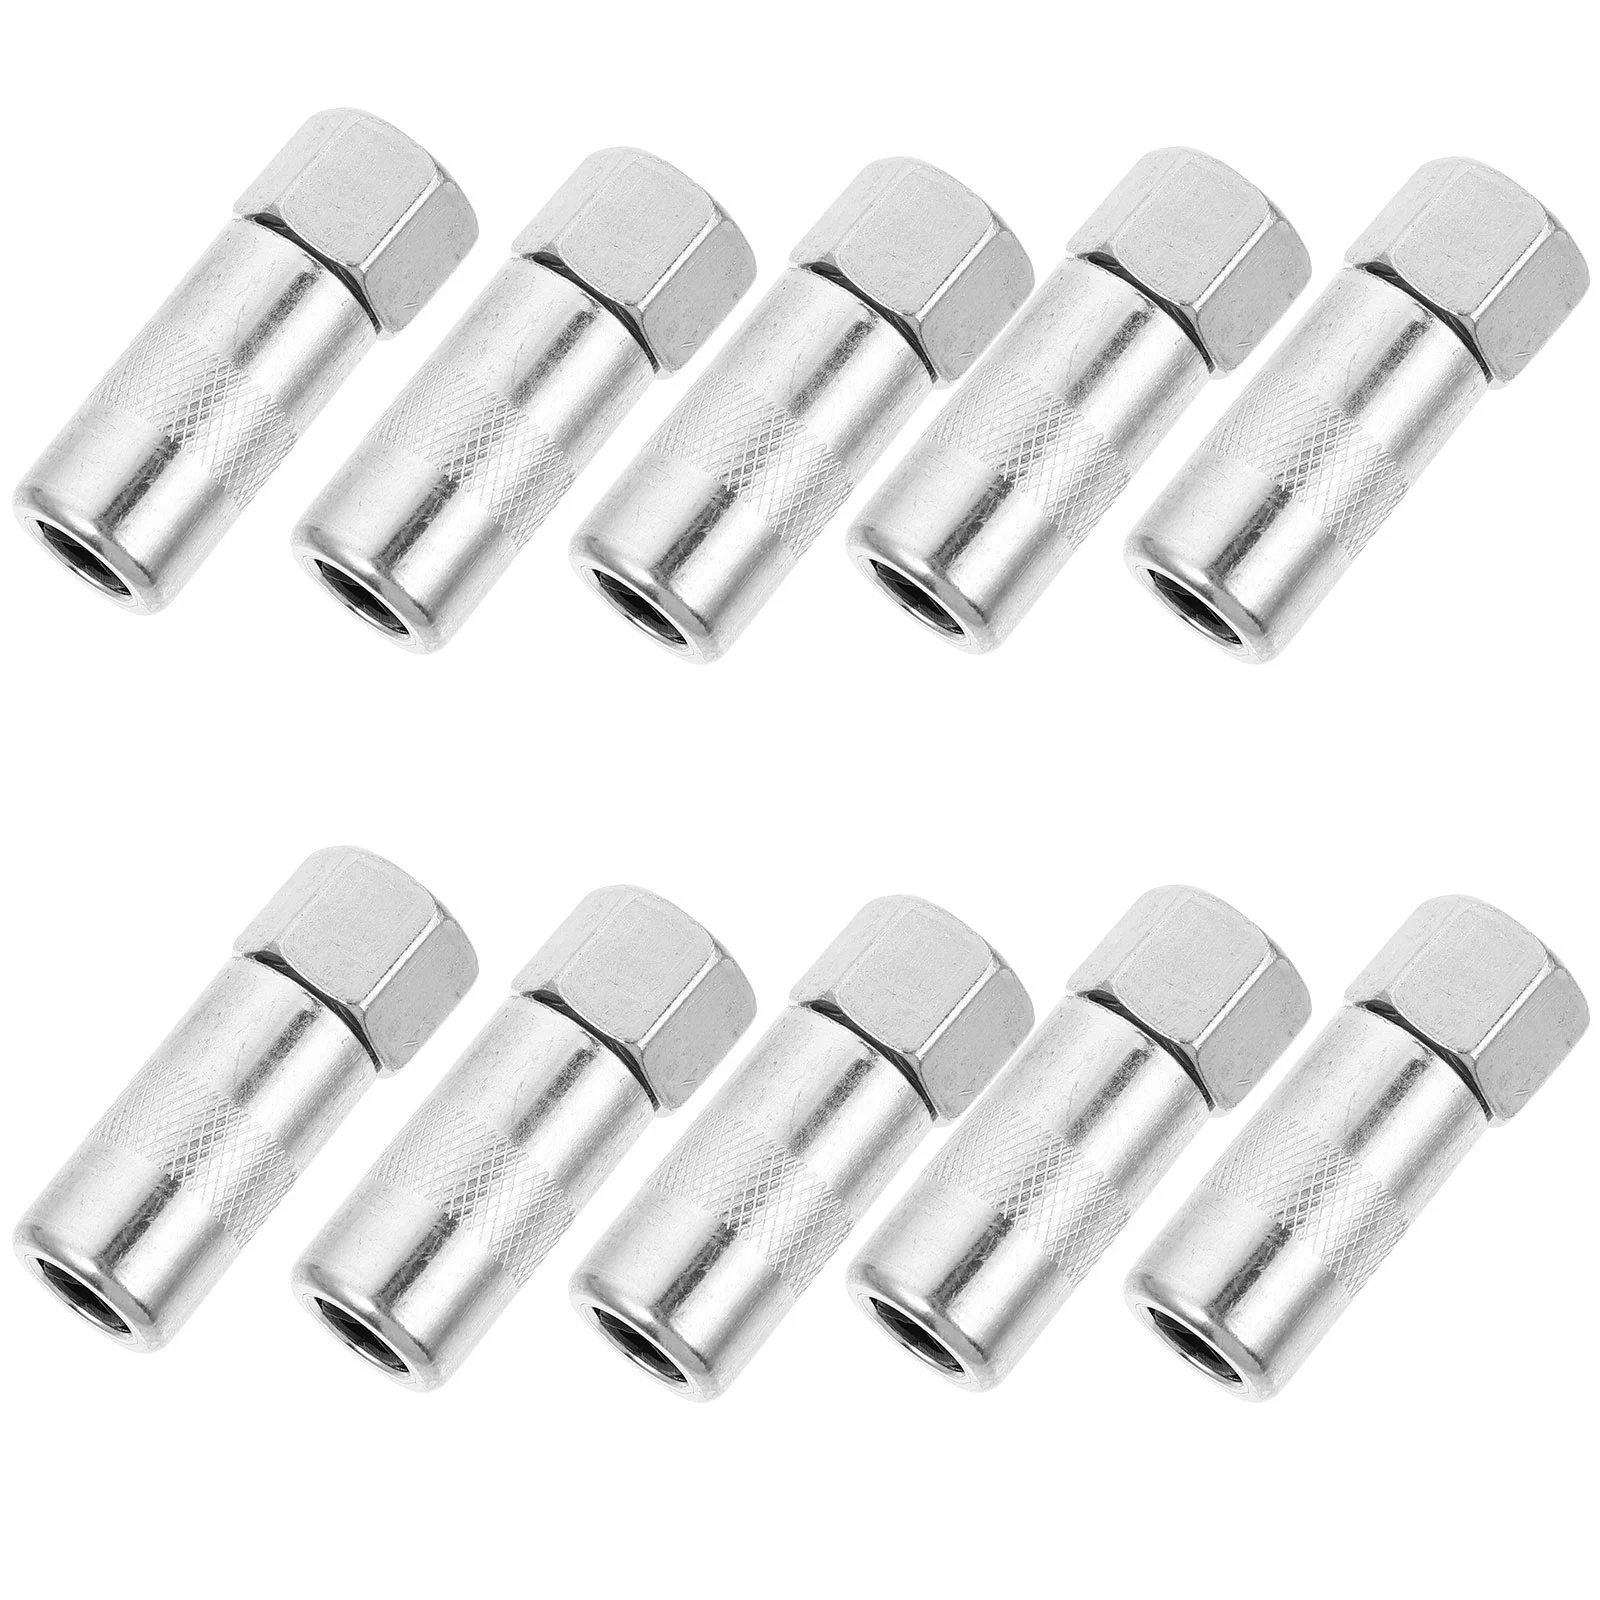 

10 Pcs Grease Tip Butter Sprayer Nozzle Accessories Appendix 4 Jaw Iron Kit Coupler